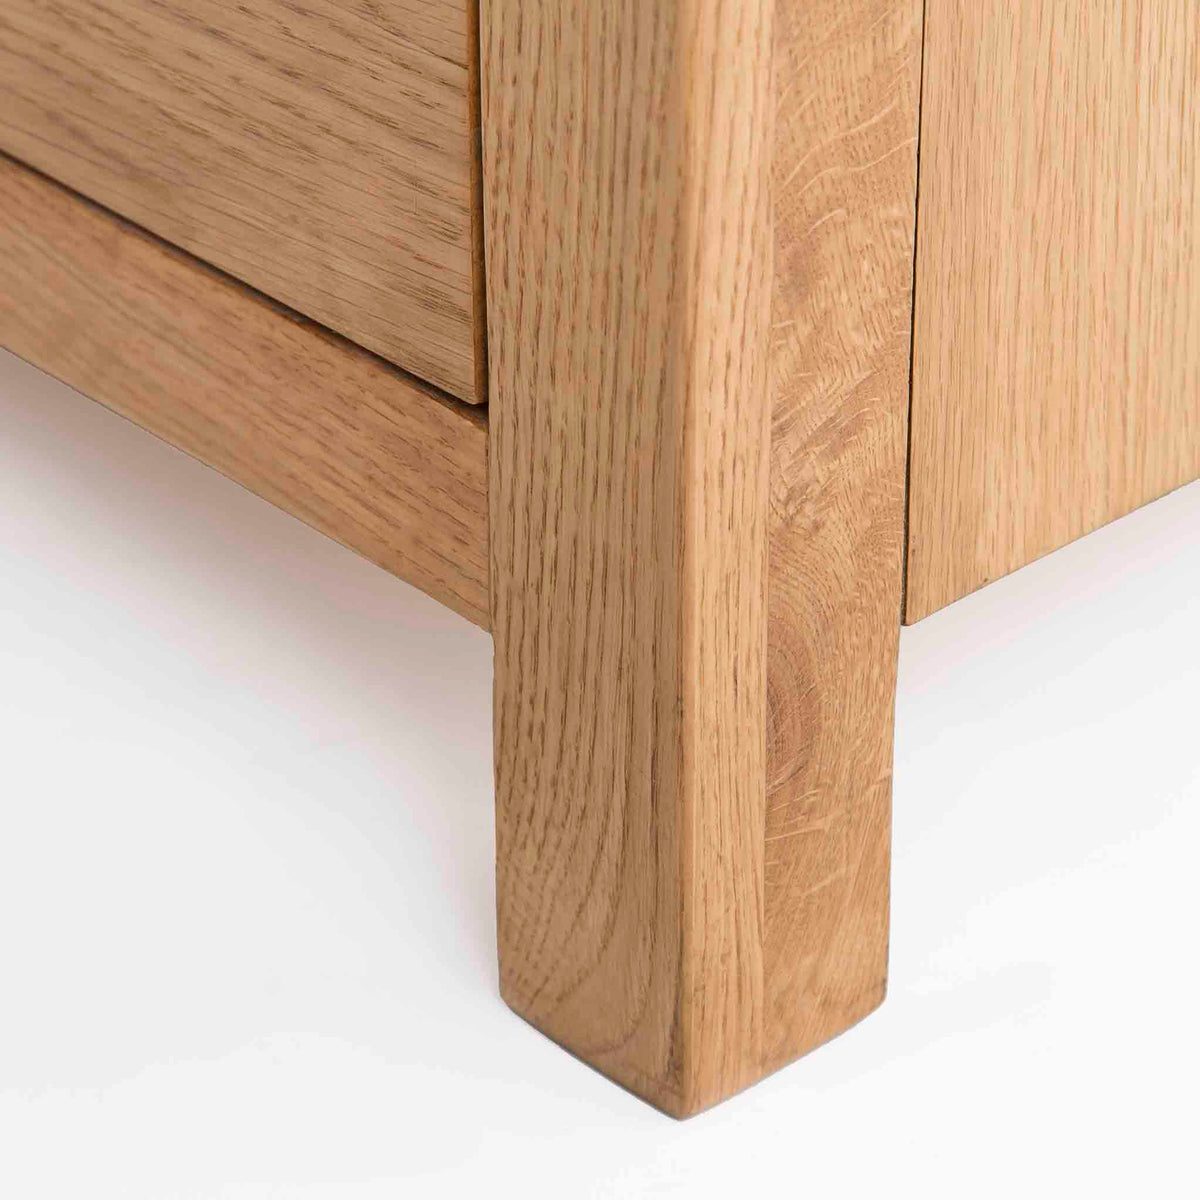 Surrey Oak Large Chest Of Drawers - Close up of foot of drawers